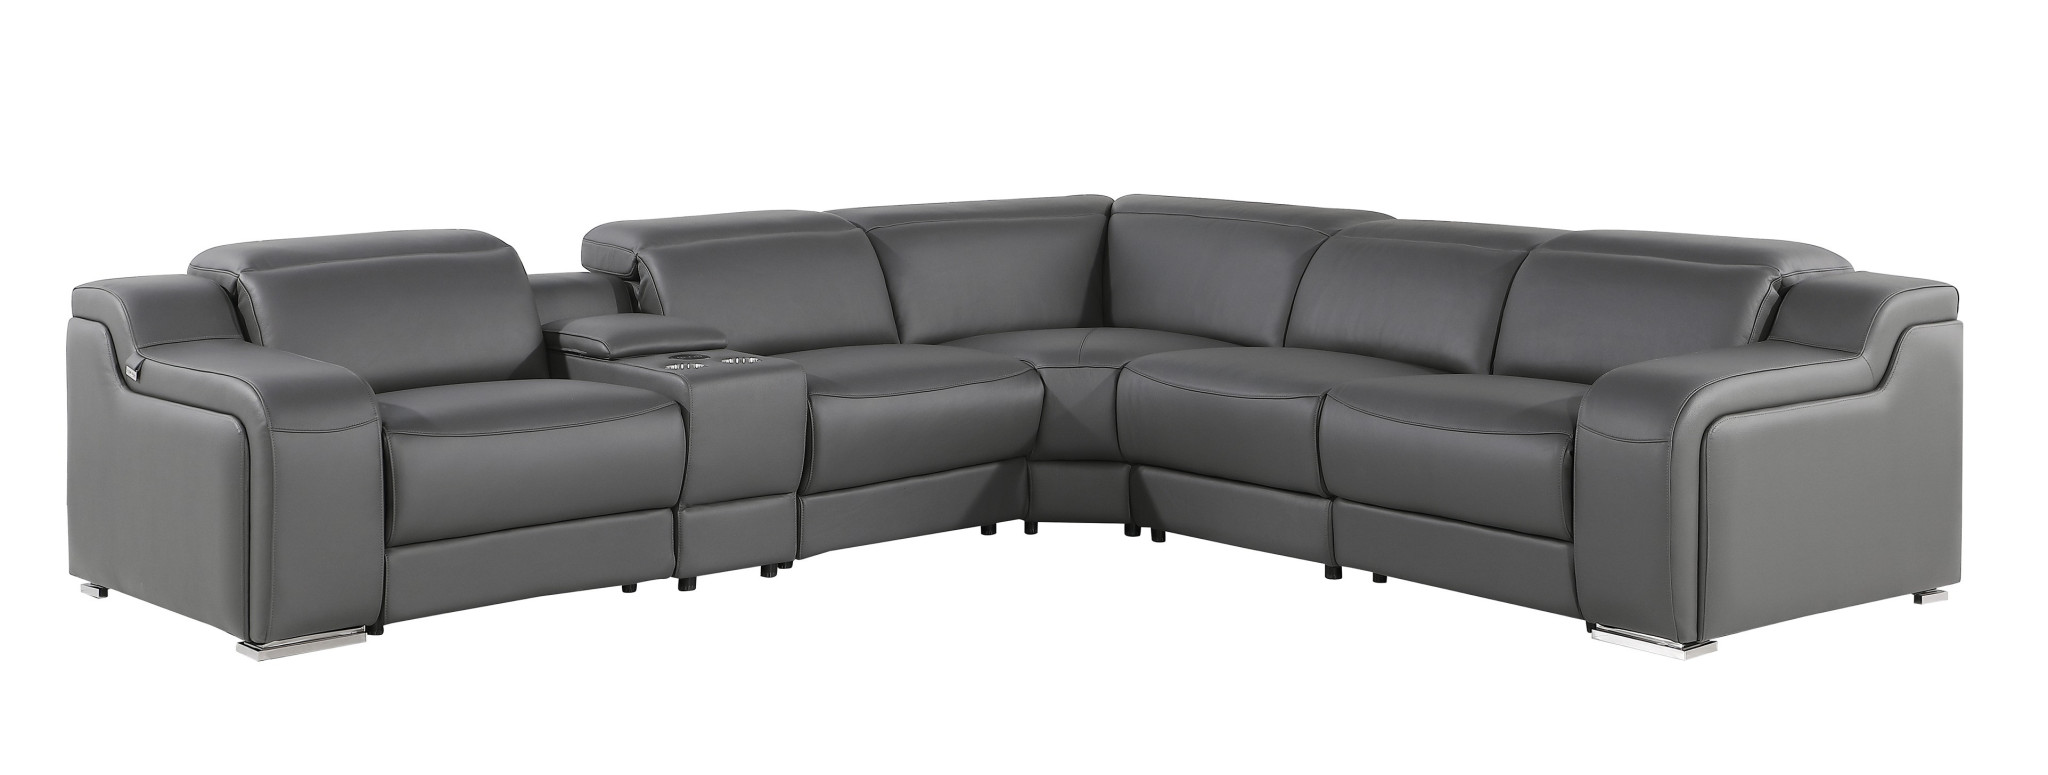 Gray Italian Leather Power Reclining Curved Six Piece Corner Sectional With Console-544982-1